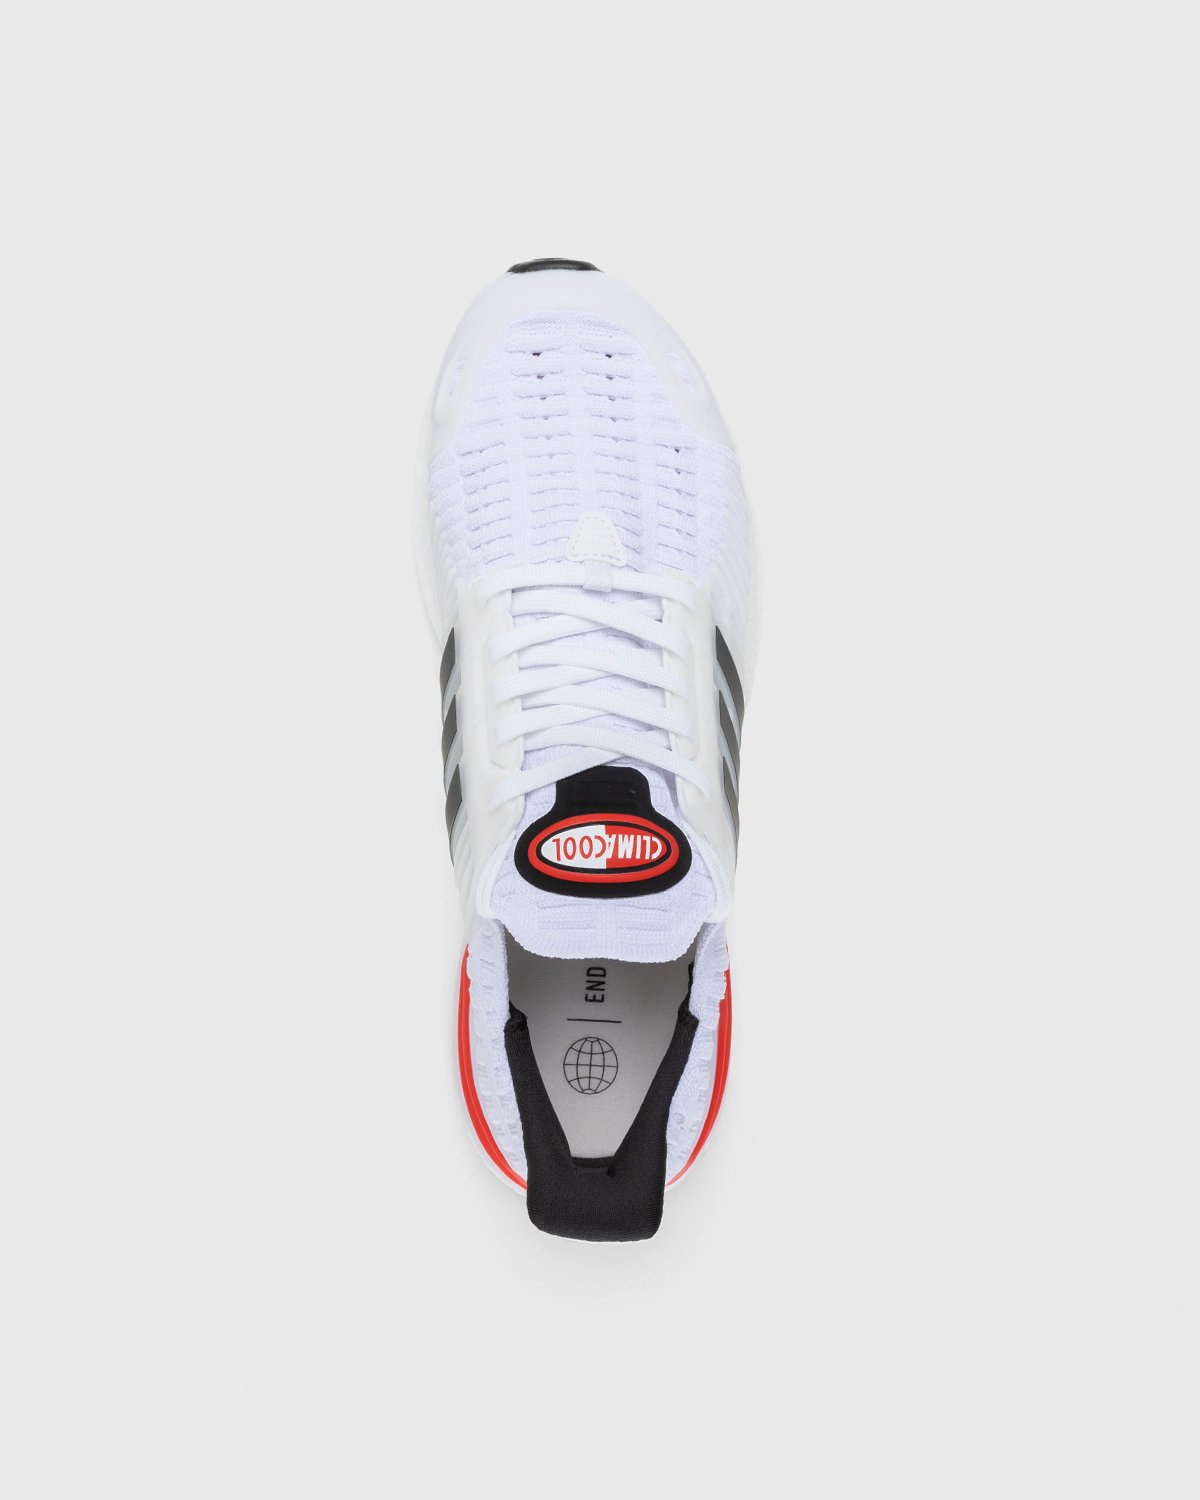 Adidas - Ultraboost Climacool 1 DNA White/Black/Red - Footwear - White - Image 5